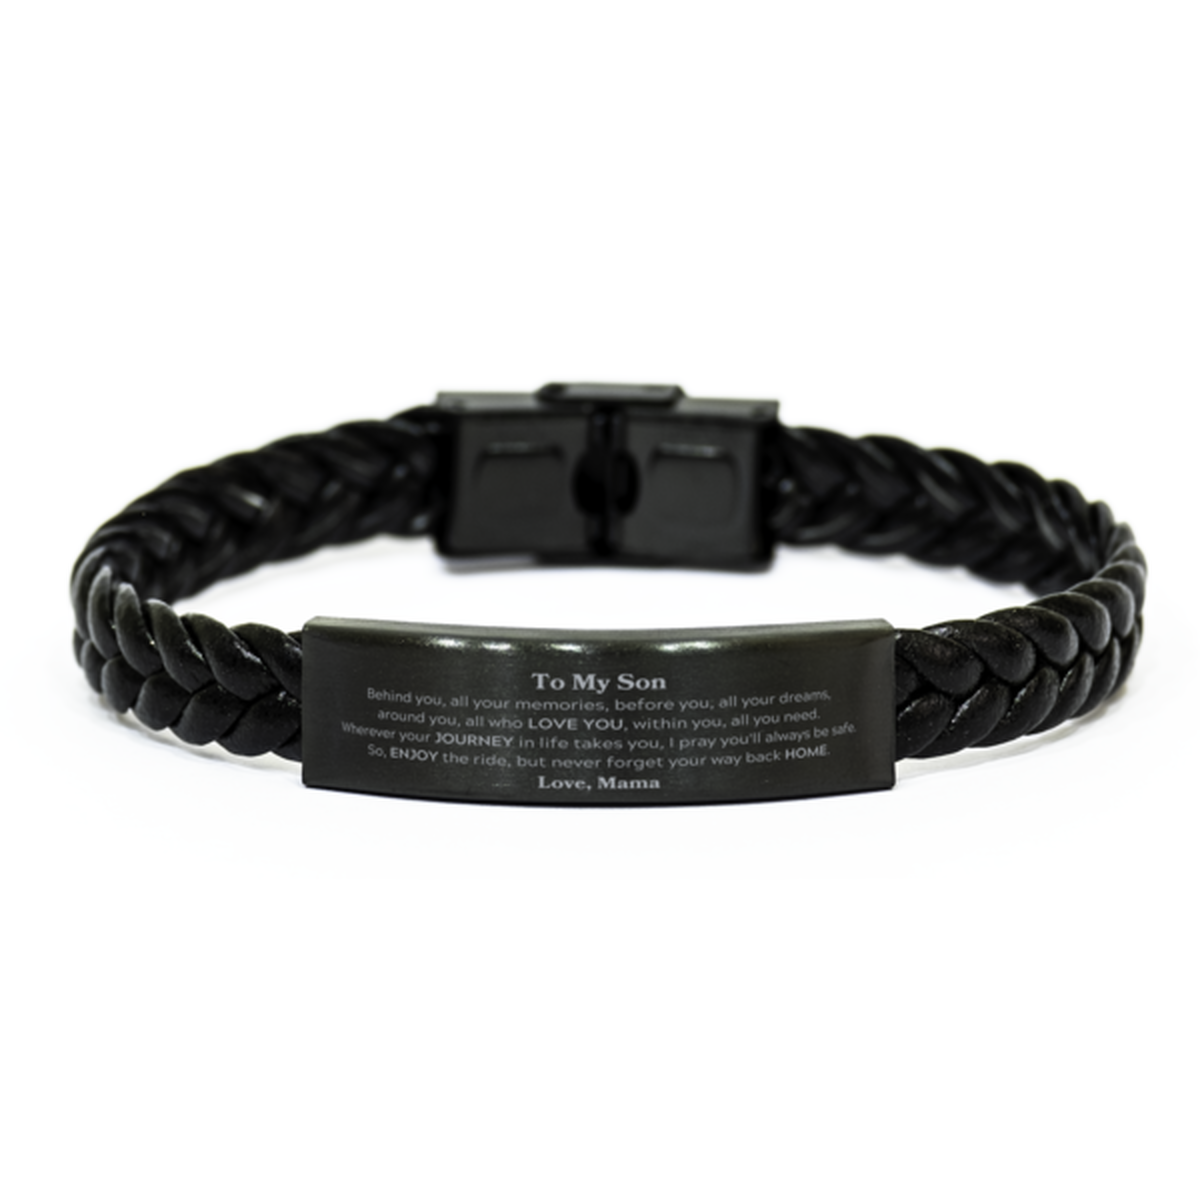 To My Son Graduation Gifts from Mama, Son Braided Leather Bracelet Christmas Birthday Gifts for Son Behind you, all your memories, before you, all your dreams. Love, Mama